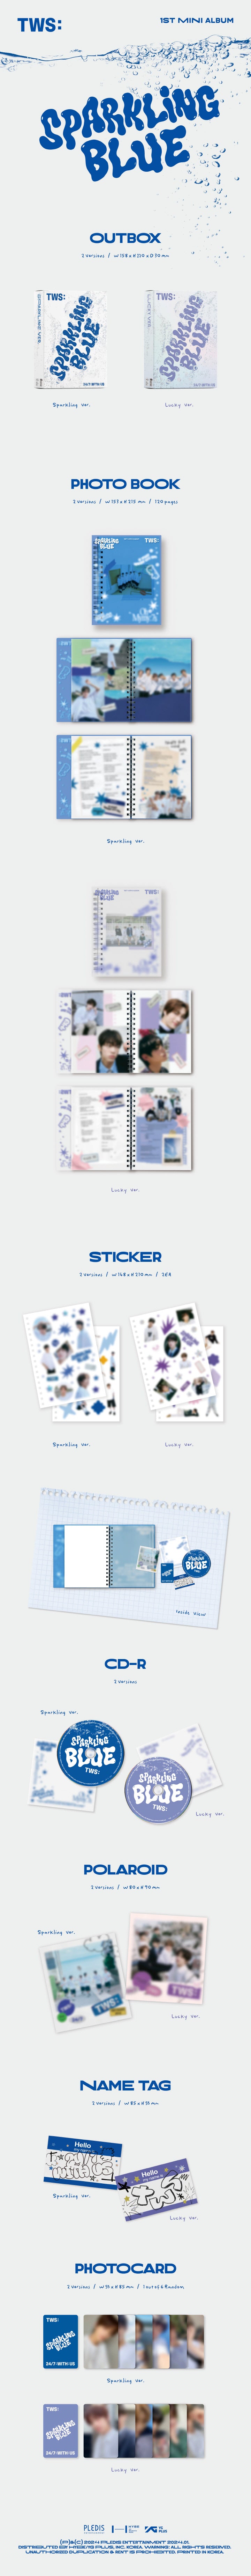 1 CD
1 Photo Book (120 pages)
2 Stickers
1 Polaroid
1 Name Tag
1 Photo Card (random out of 6 types)